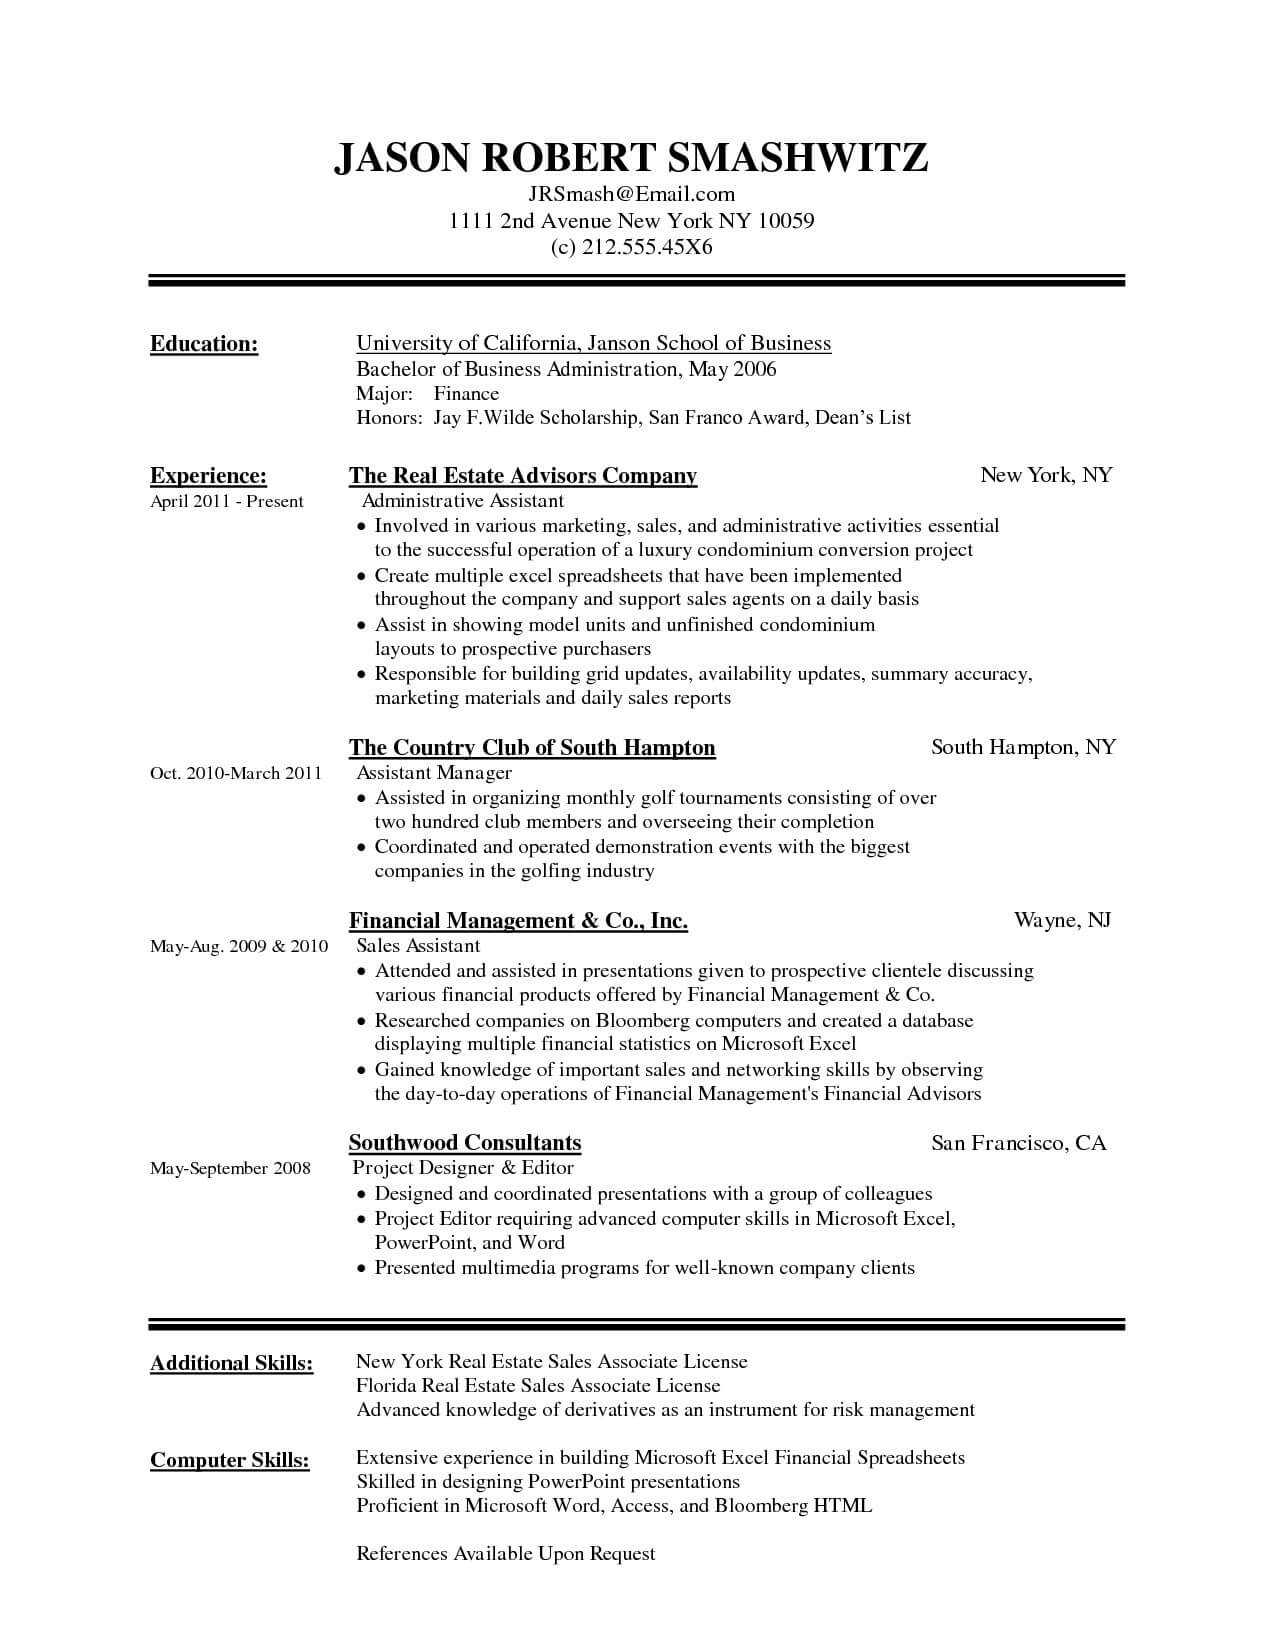 Awesome Resume Templates For Word 2010 – Superkepo Throughout Resume Templates Word 2010